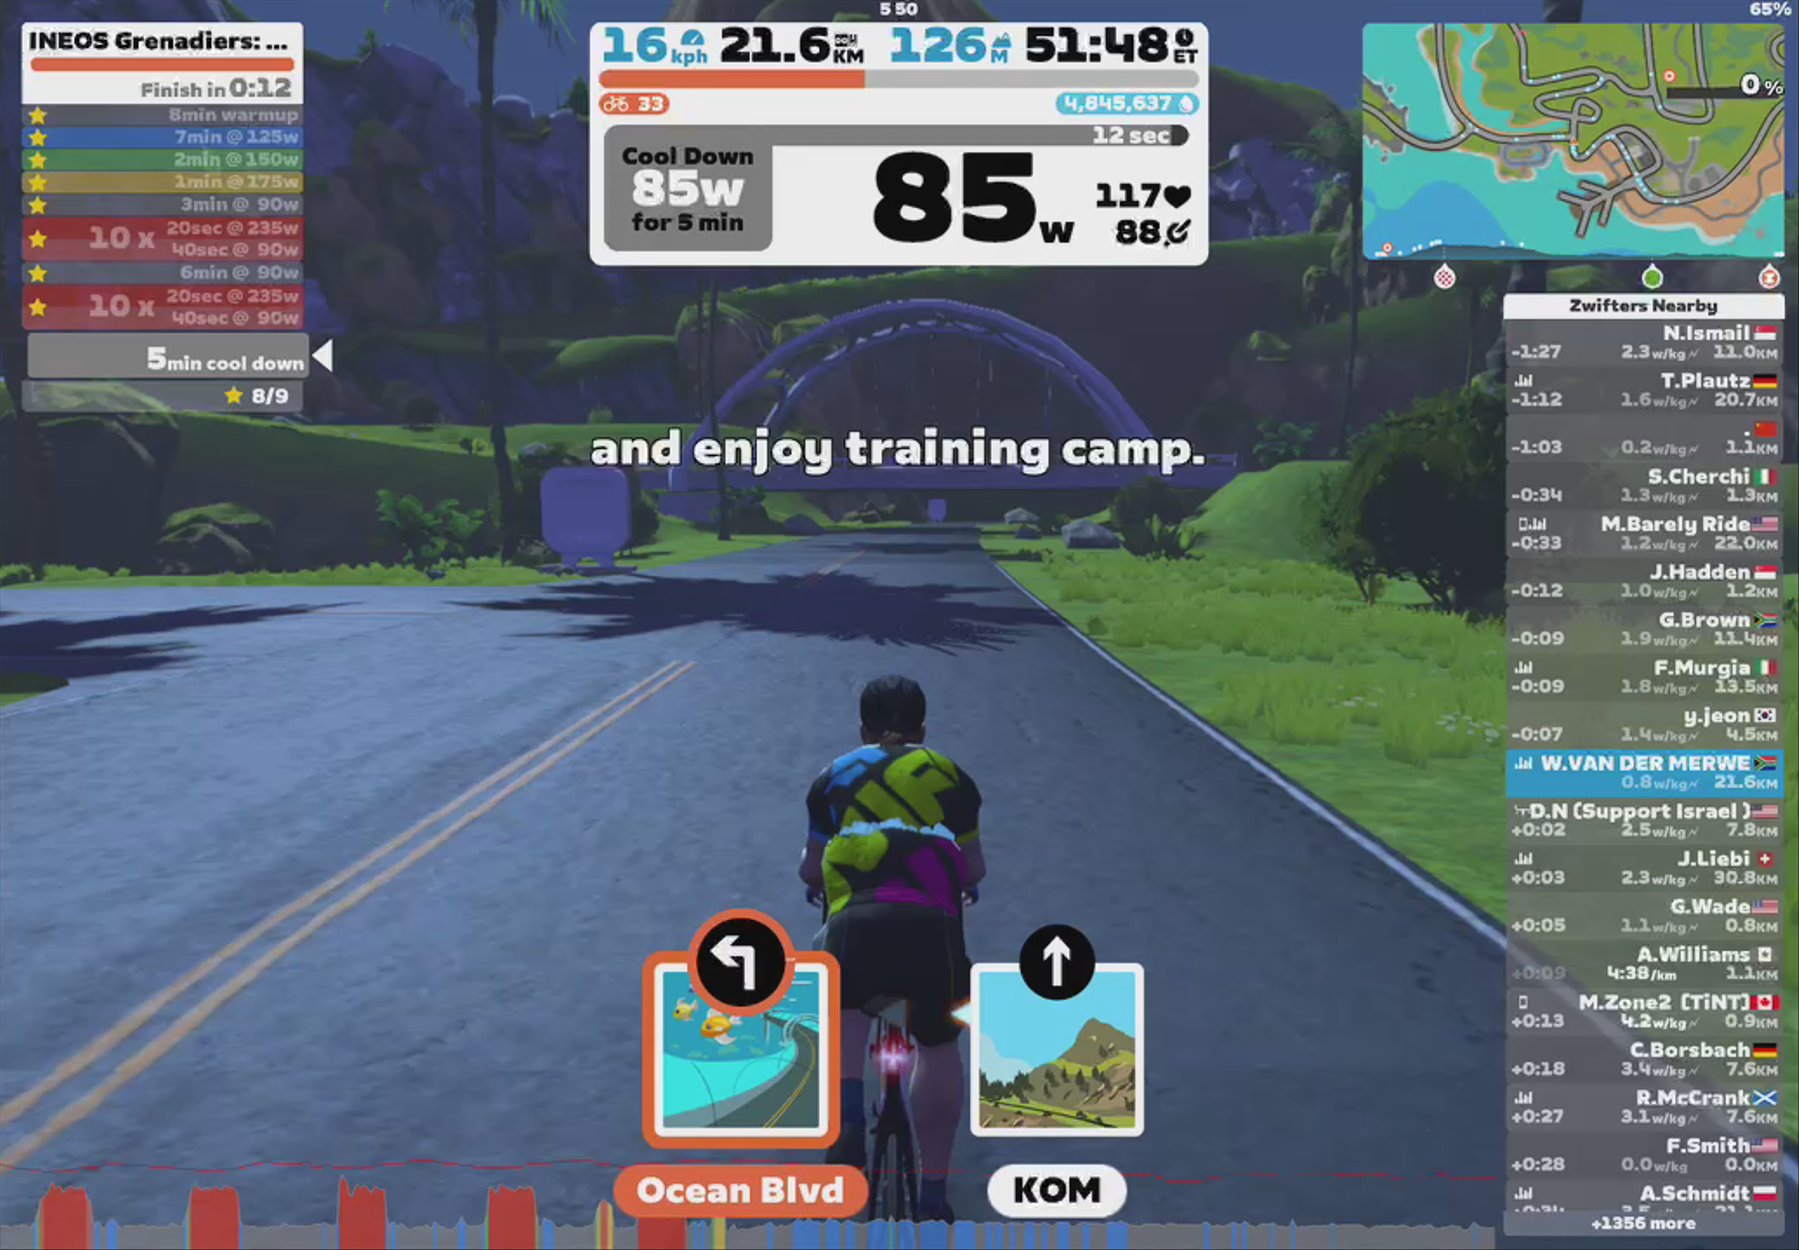 Zwift - Zwift Pro Training Camp: INEOS Grenadiers | Team Workout 1 in Watopia